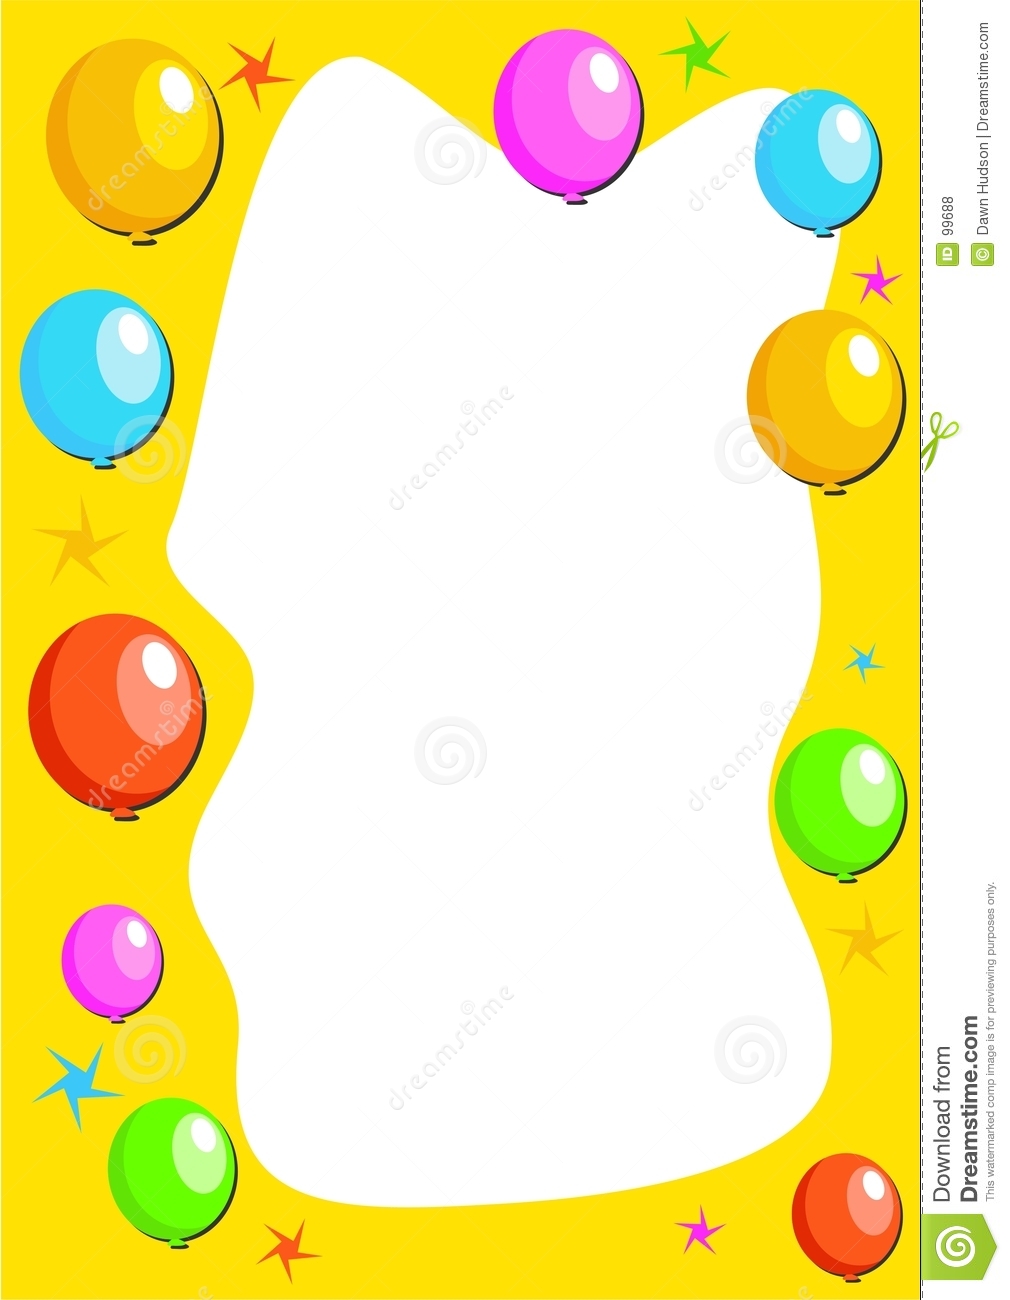 Birthday Party Clip Art Borders   Clipart Panda   Free Clipart Images